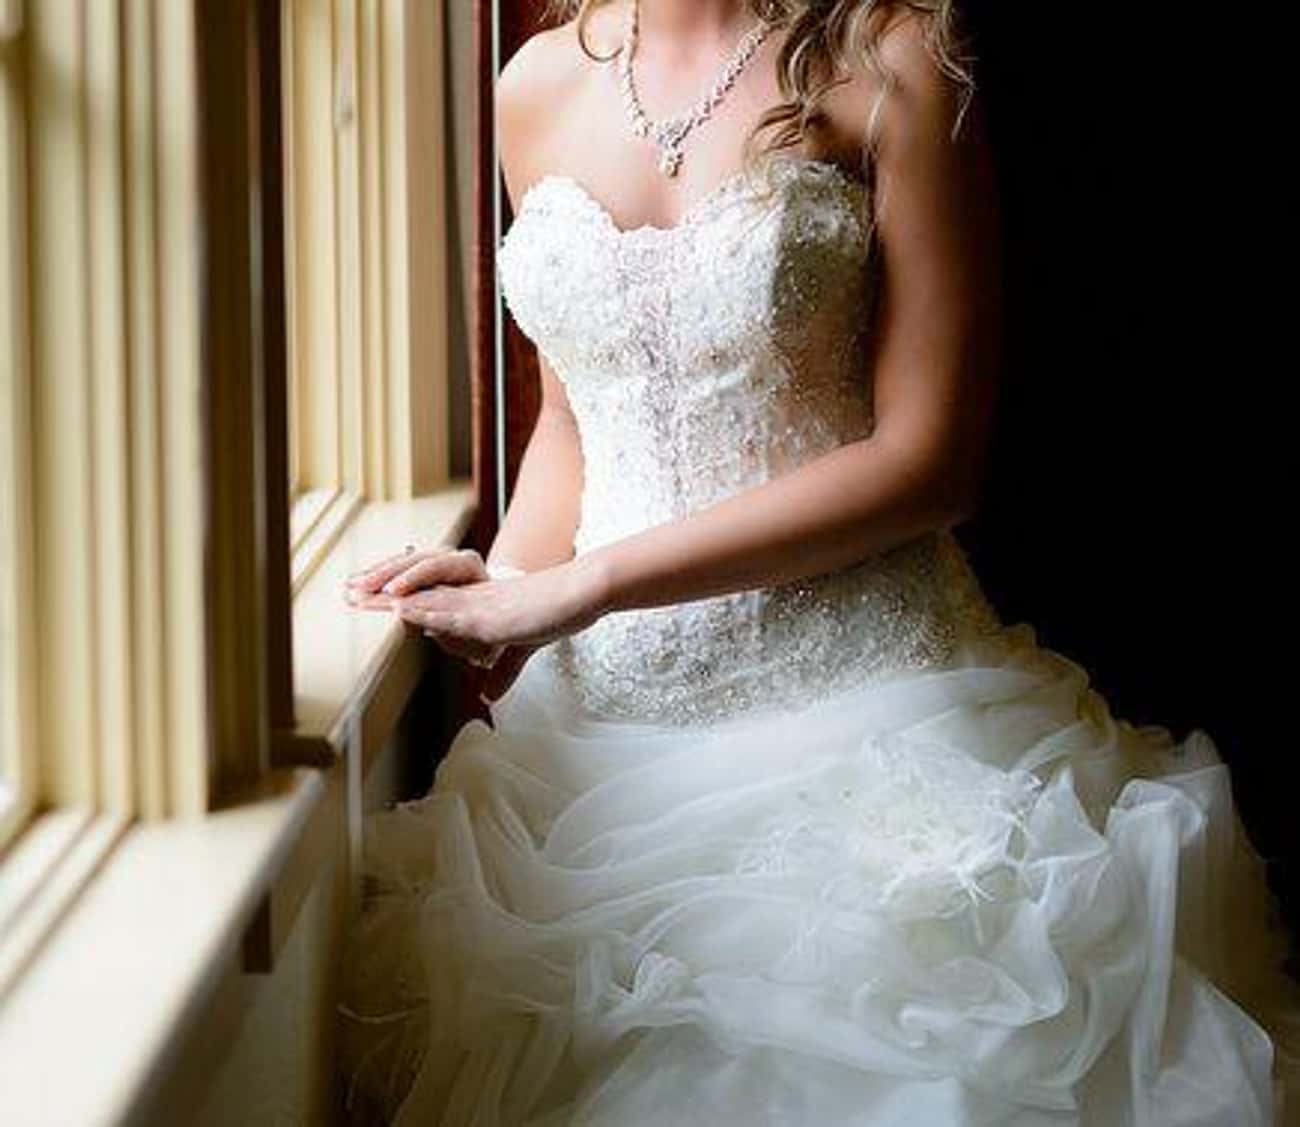 A Murdered Bride Still Waits for Her Special Day